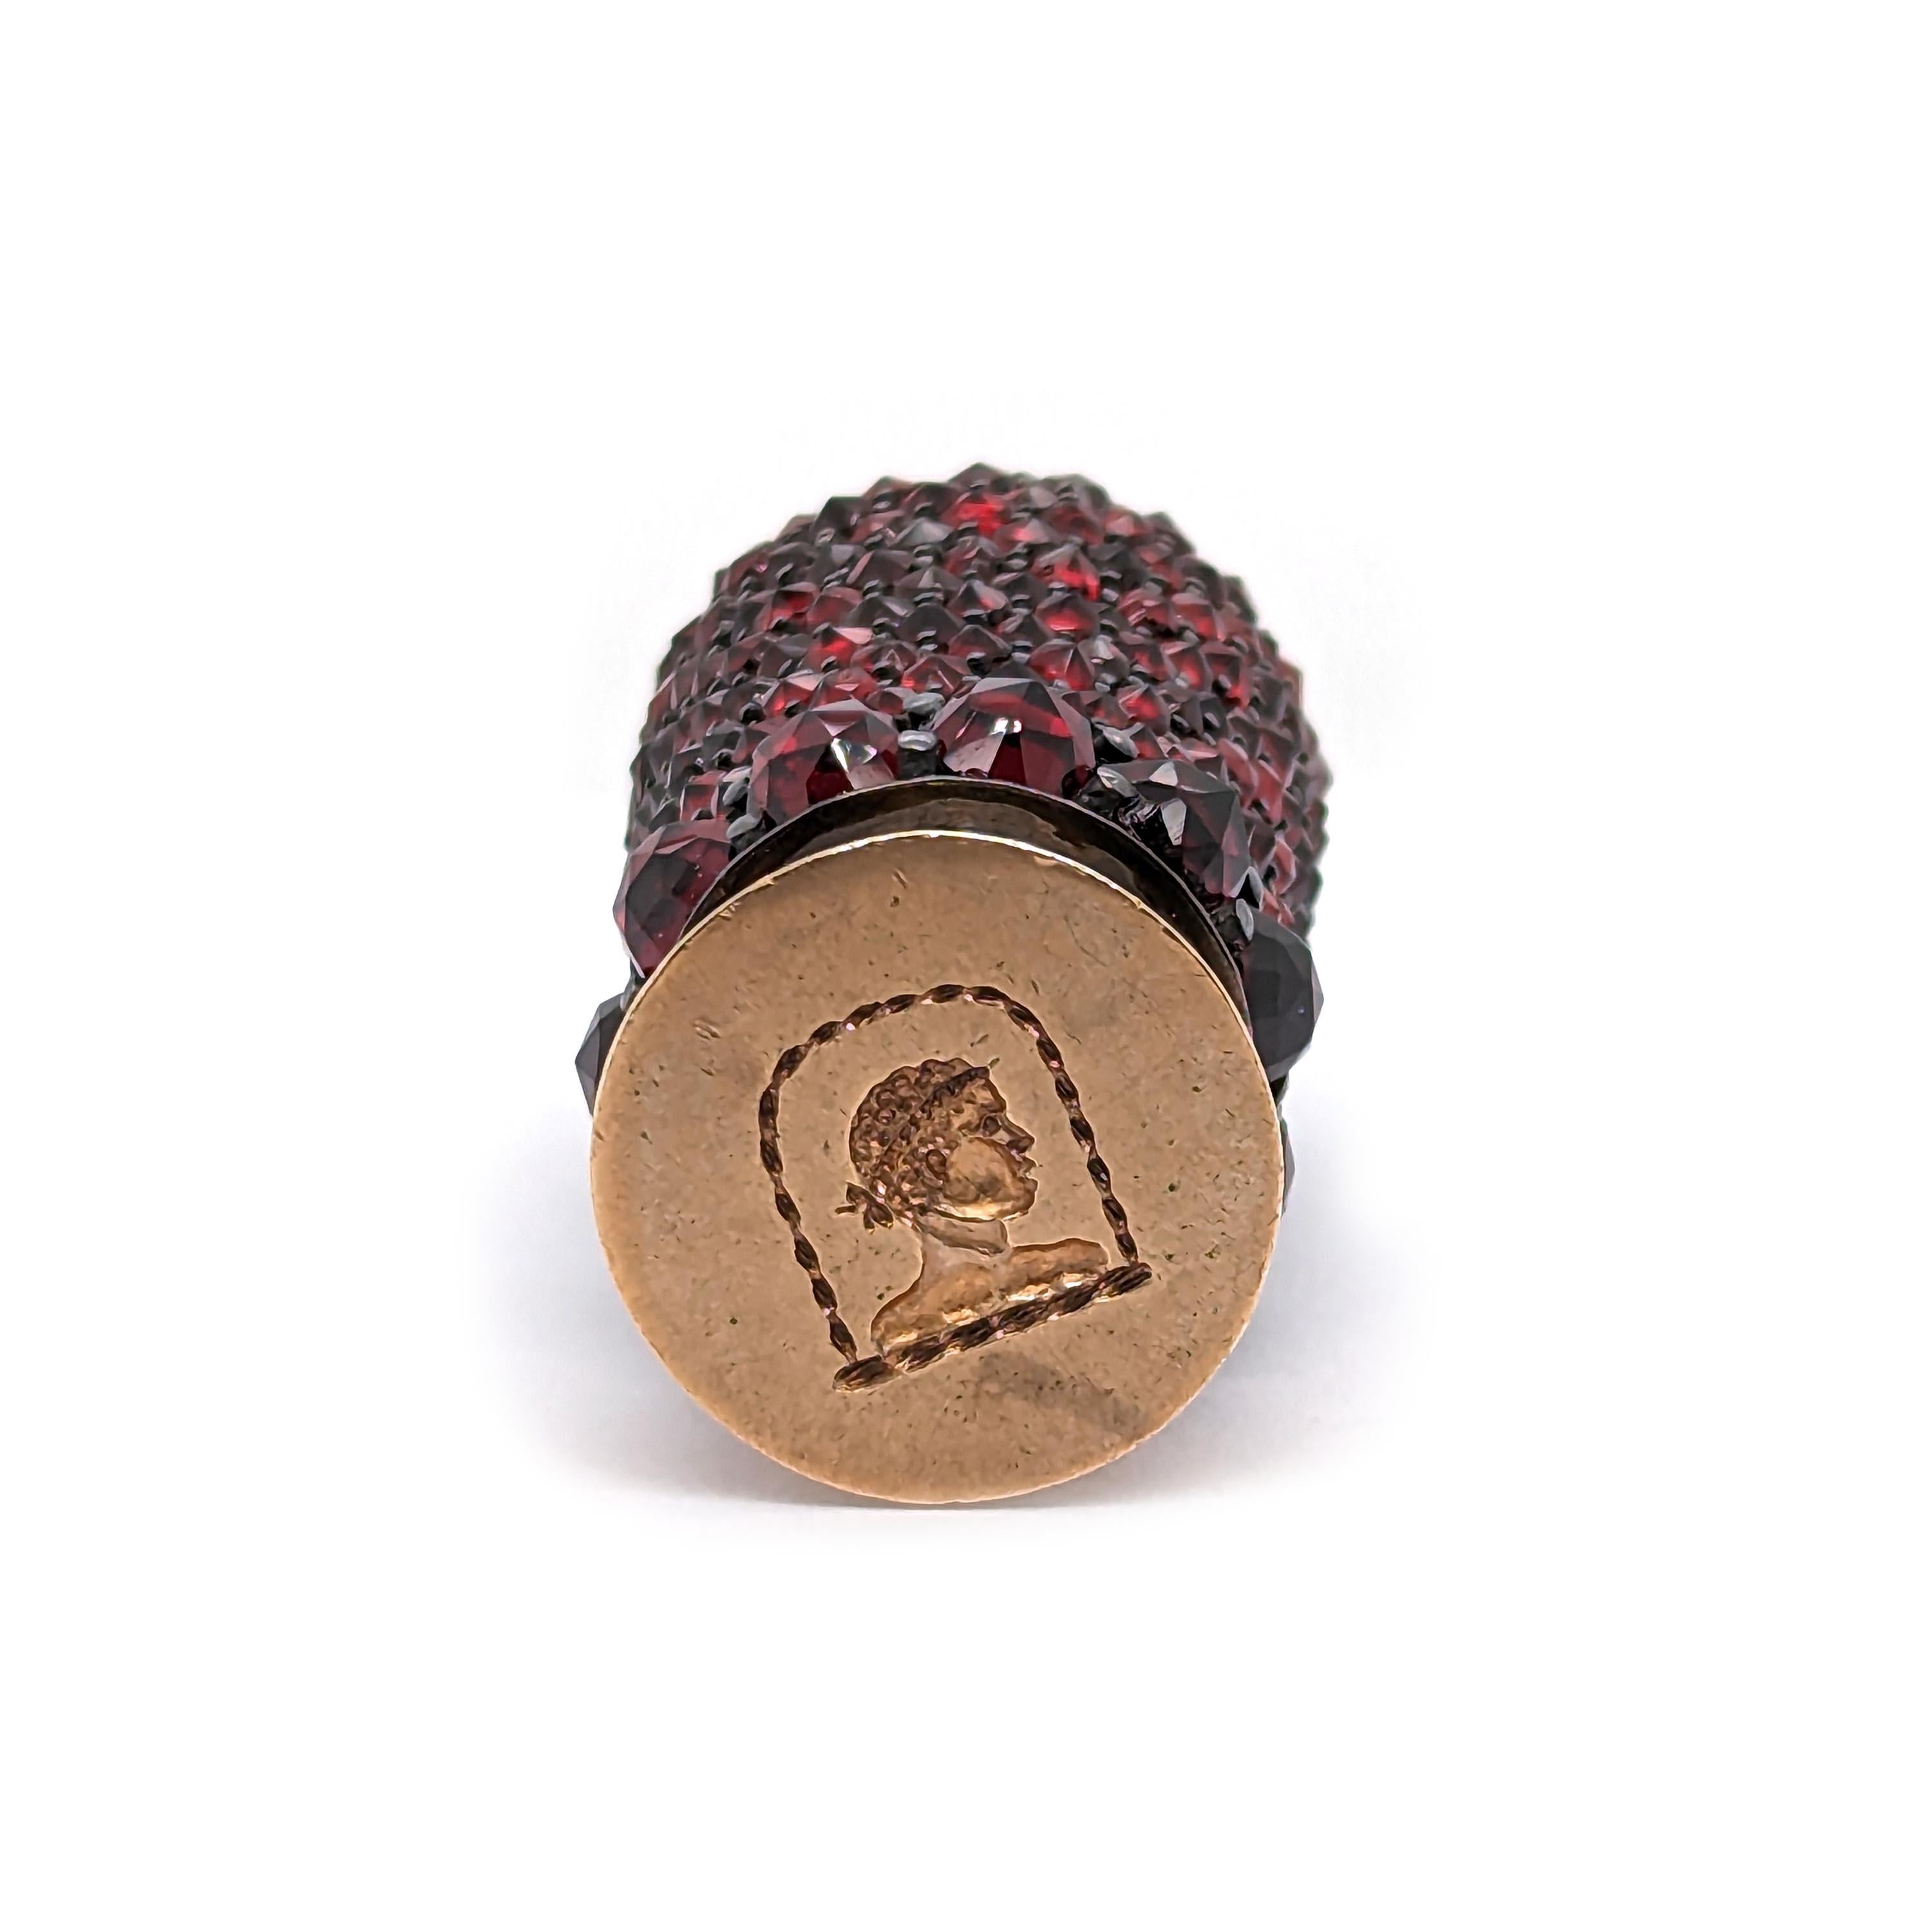 An antique garnet set desk seal, with pavé set rose-cut garnets on the handle, mounted in silver, with a gold seal, engraved with the head of a man, with a Roman hairstyle, circa 1850.